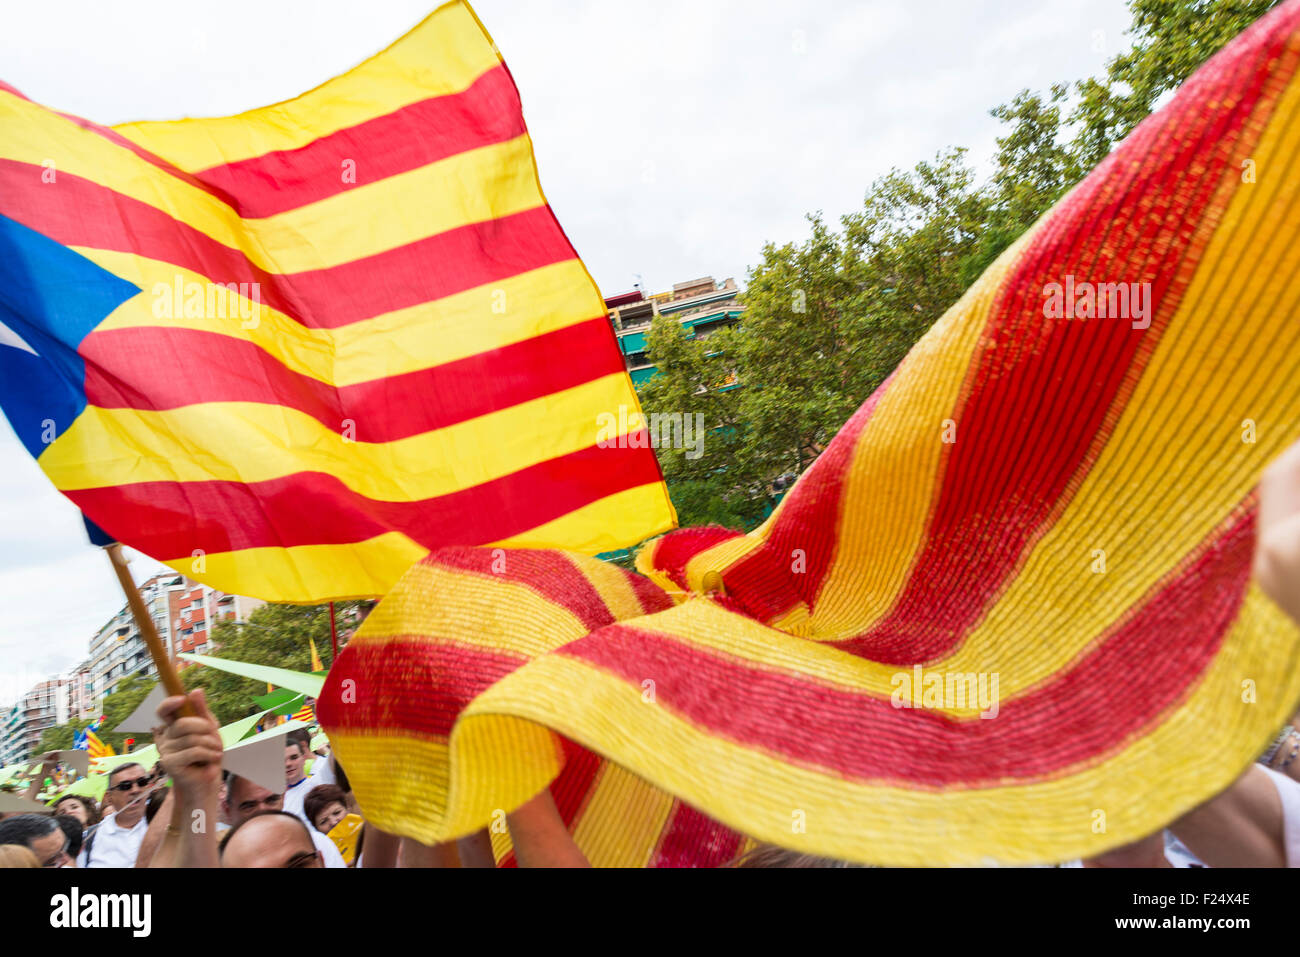 People at rally demanding independence for Catalonia (National Day of Catalonia). Stock Photo